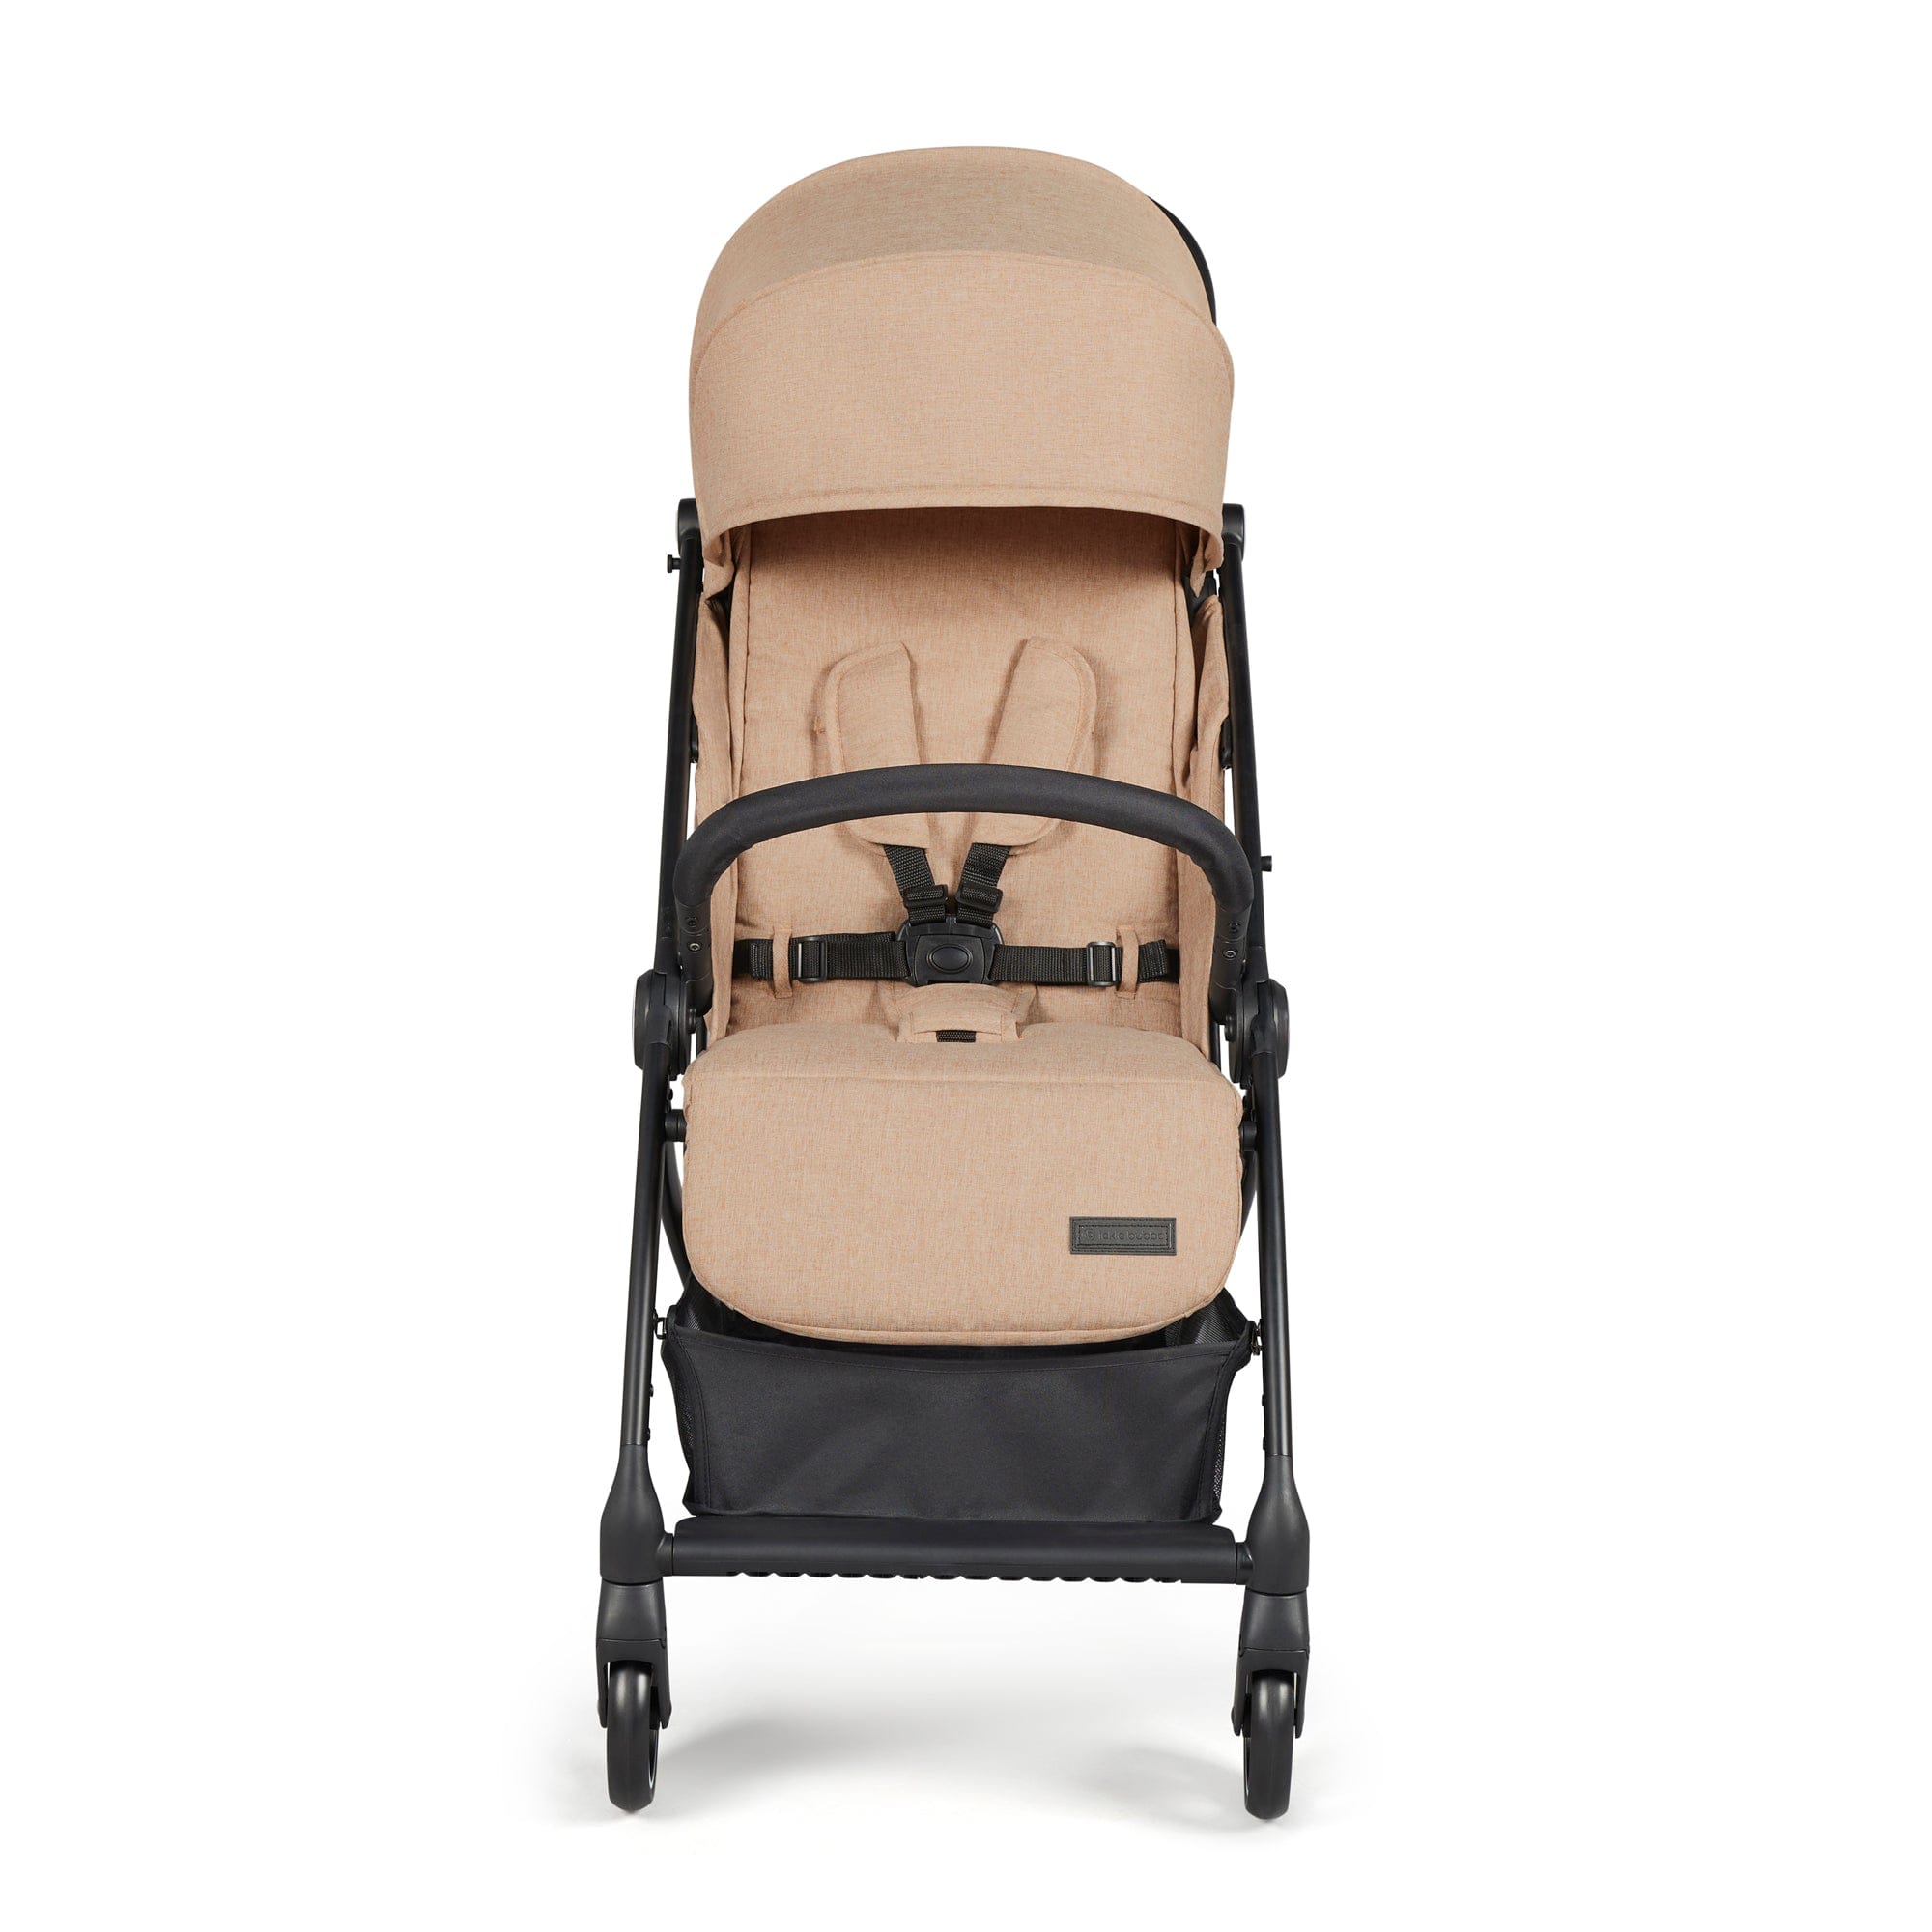 Ickle Bubba baby pushchairs Ickle Bubba Aries Autofold Stroller in Biscuit 15-005-100-157